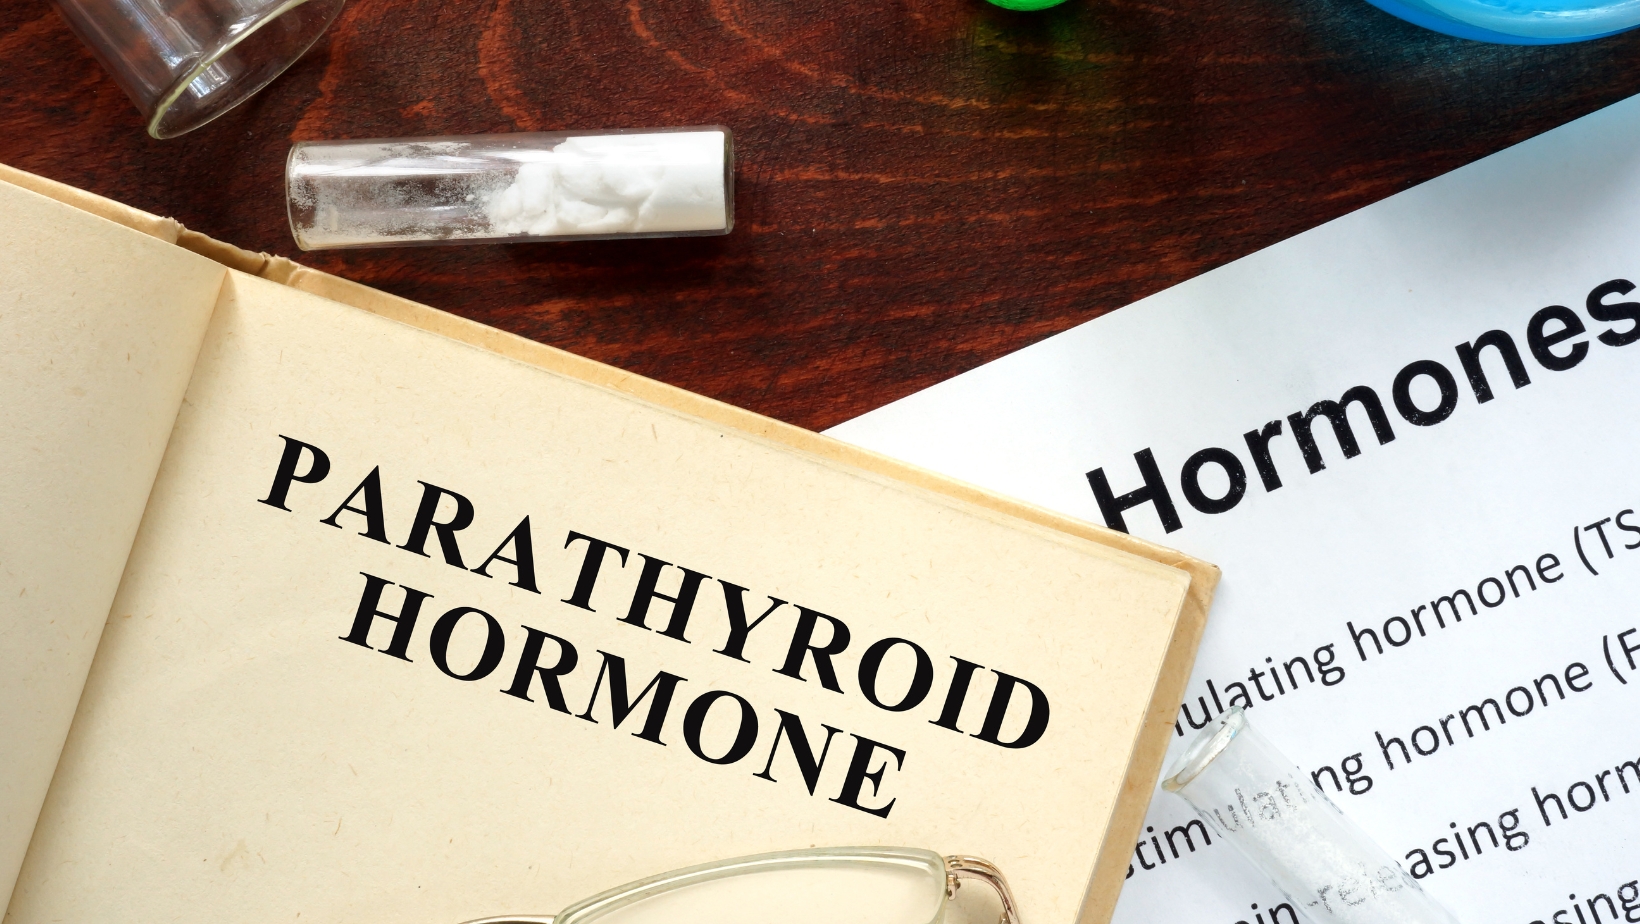 what is not an effect of parathyroid hormone (pth)?